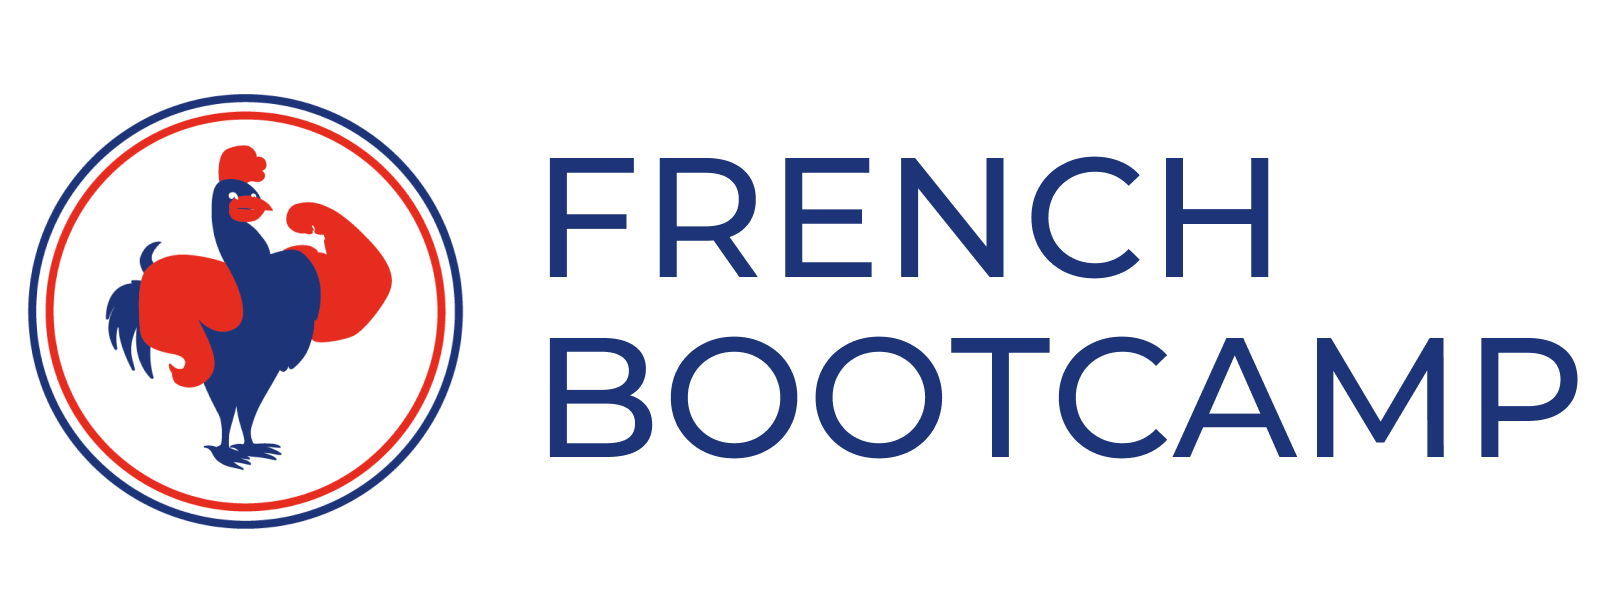 French Bootcamp